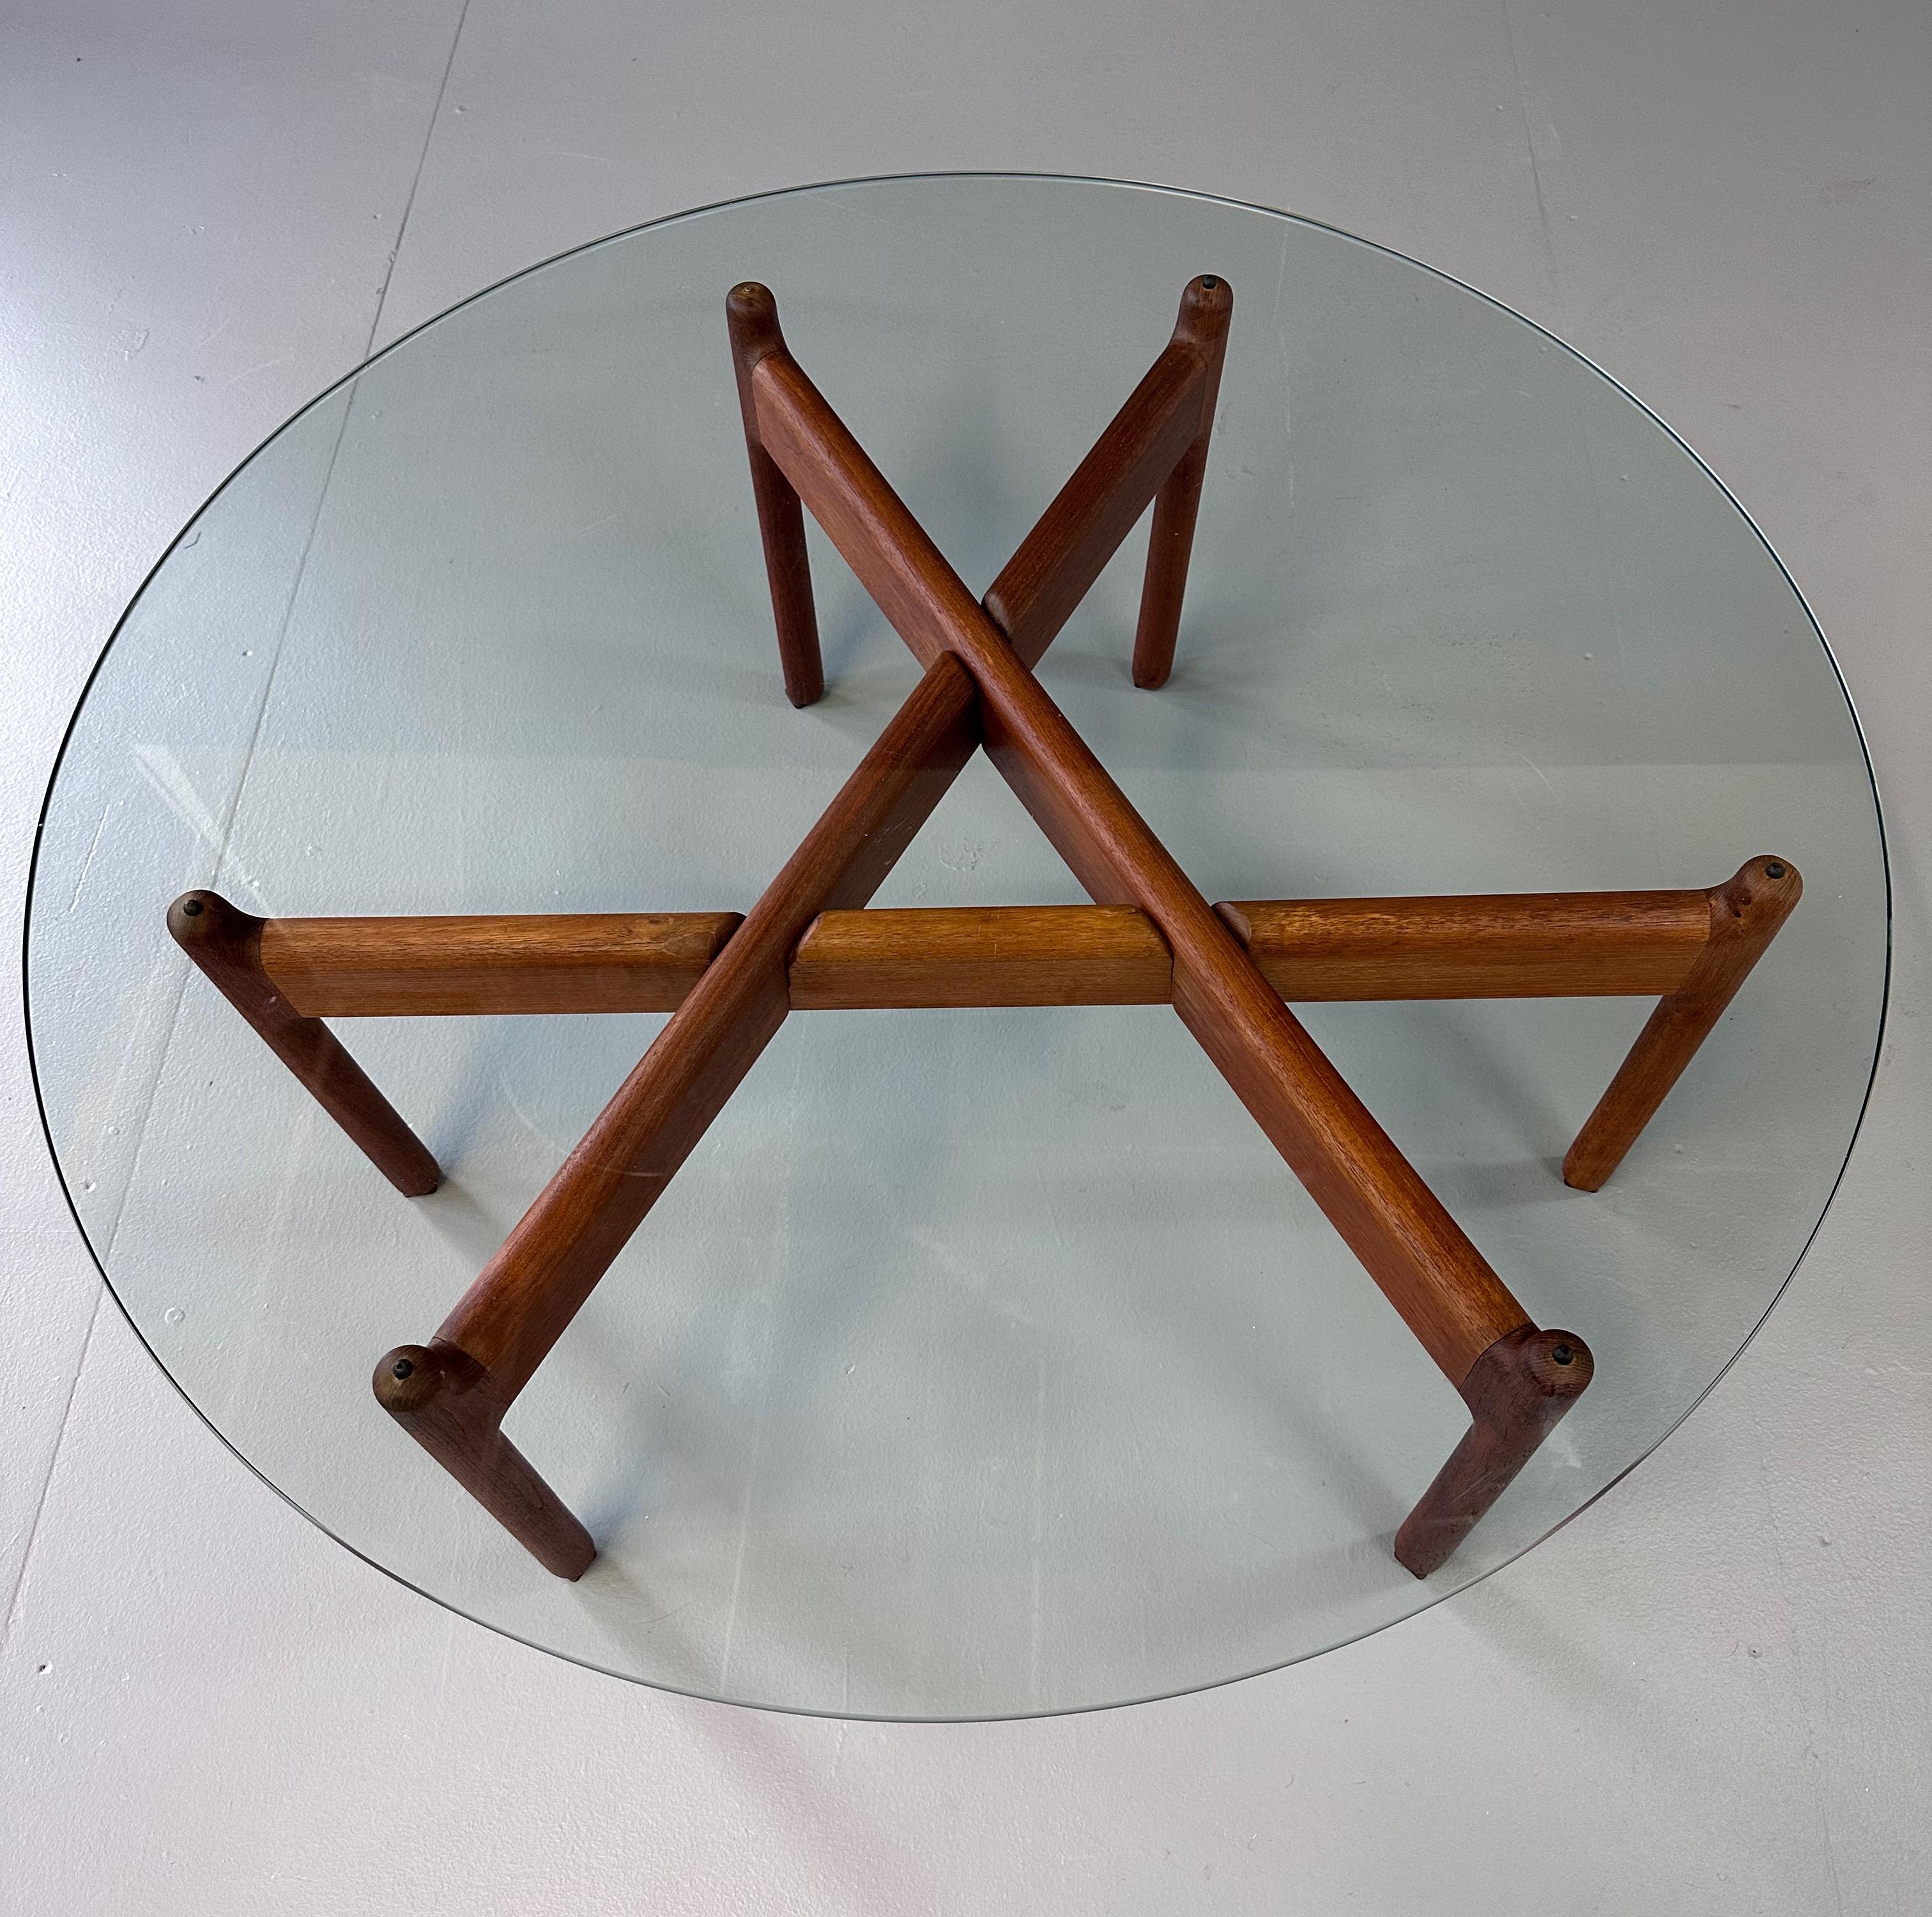 Very nice and rare coffee table designed by Niels Bach, Denmark 1960. This table has a solid teak base existing in 3 parts, easy to assemble. With a hardened glass top. Very nice sculptural shaped table.